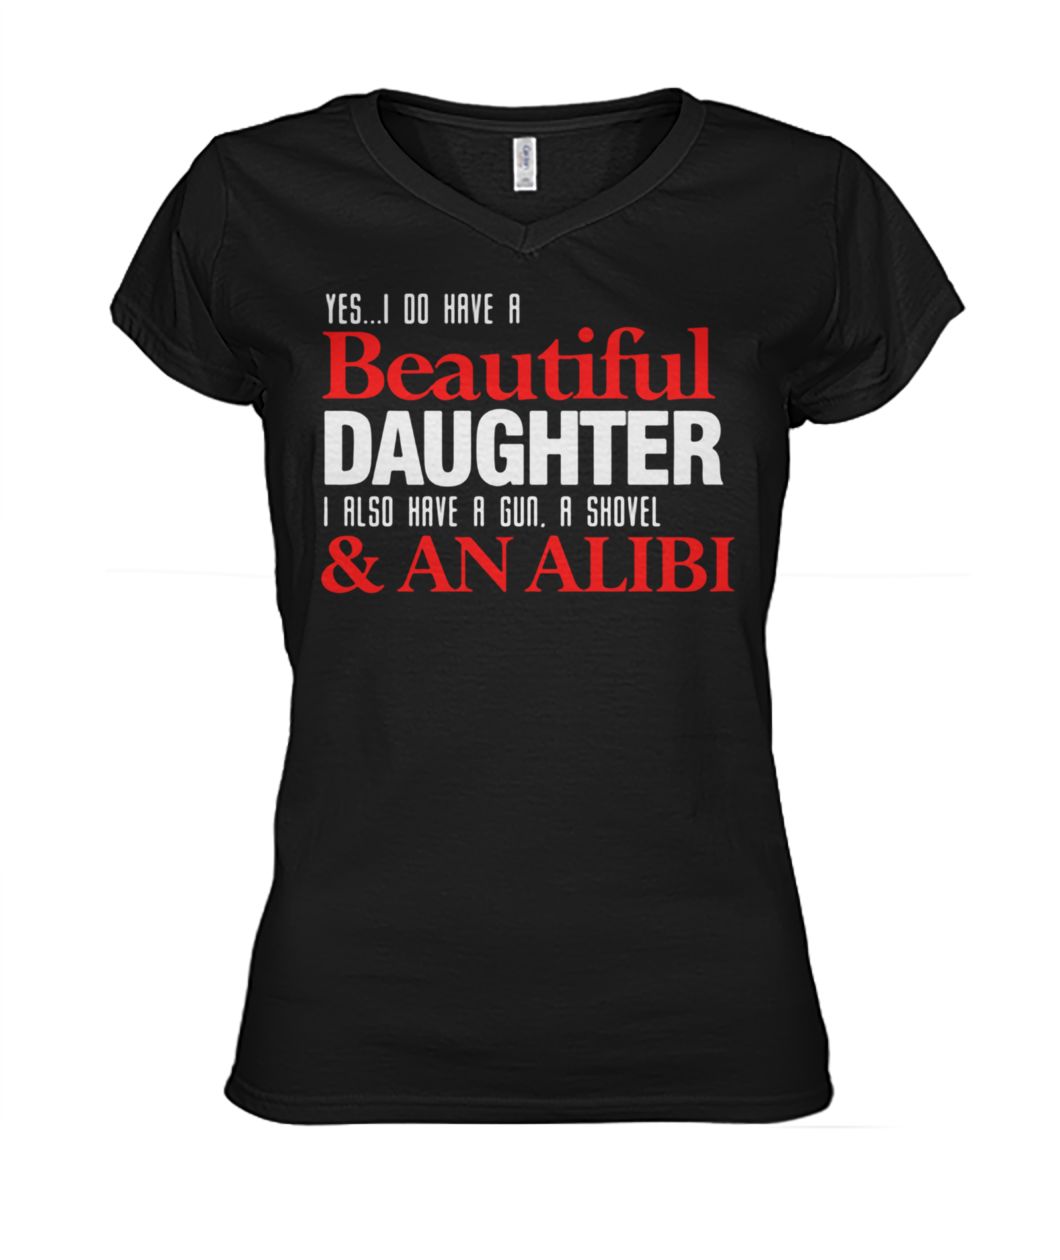 Yes I do have a beautiful daughter I also have a gun a shovel and an alibi women's v-neck